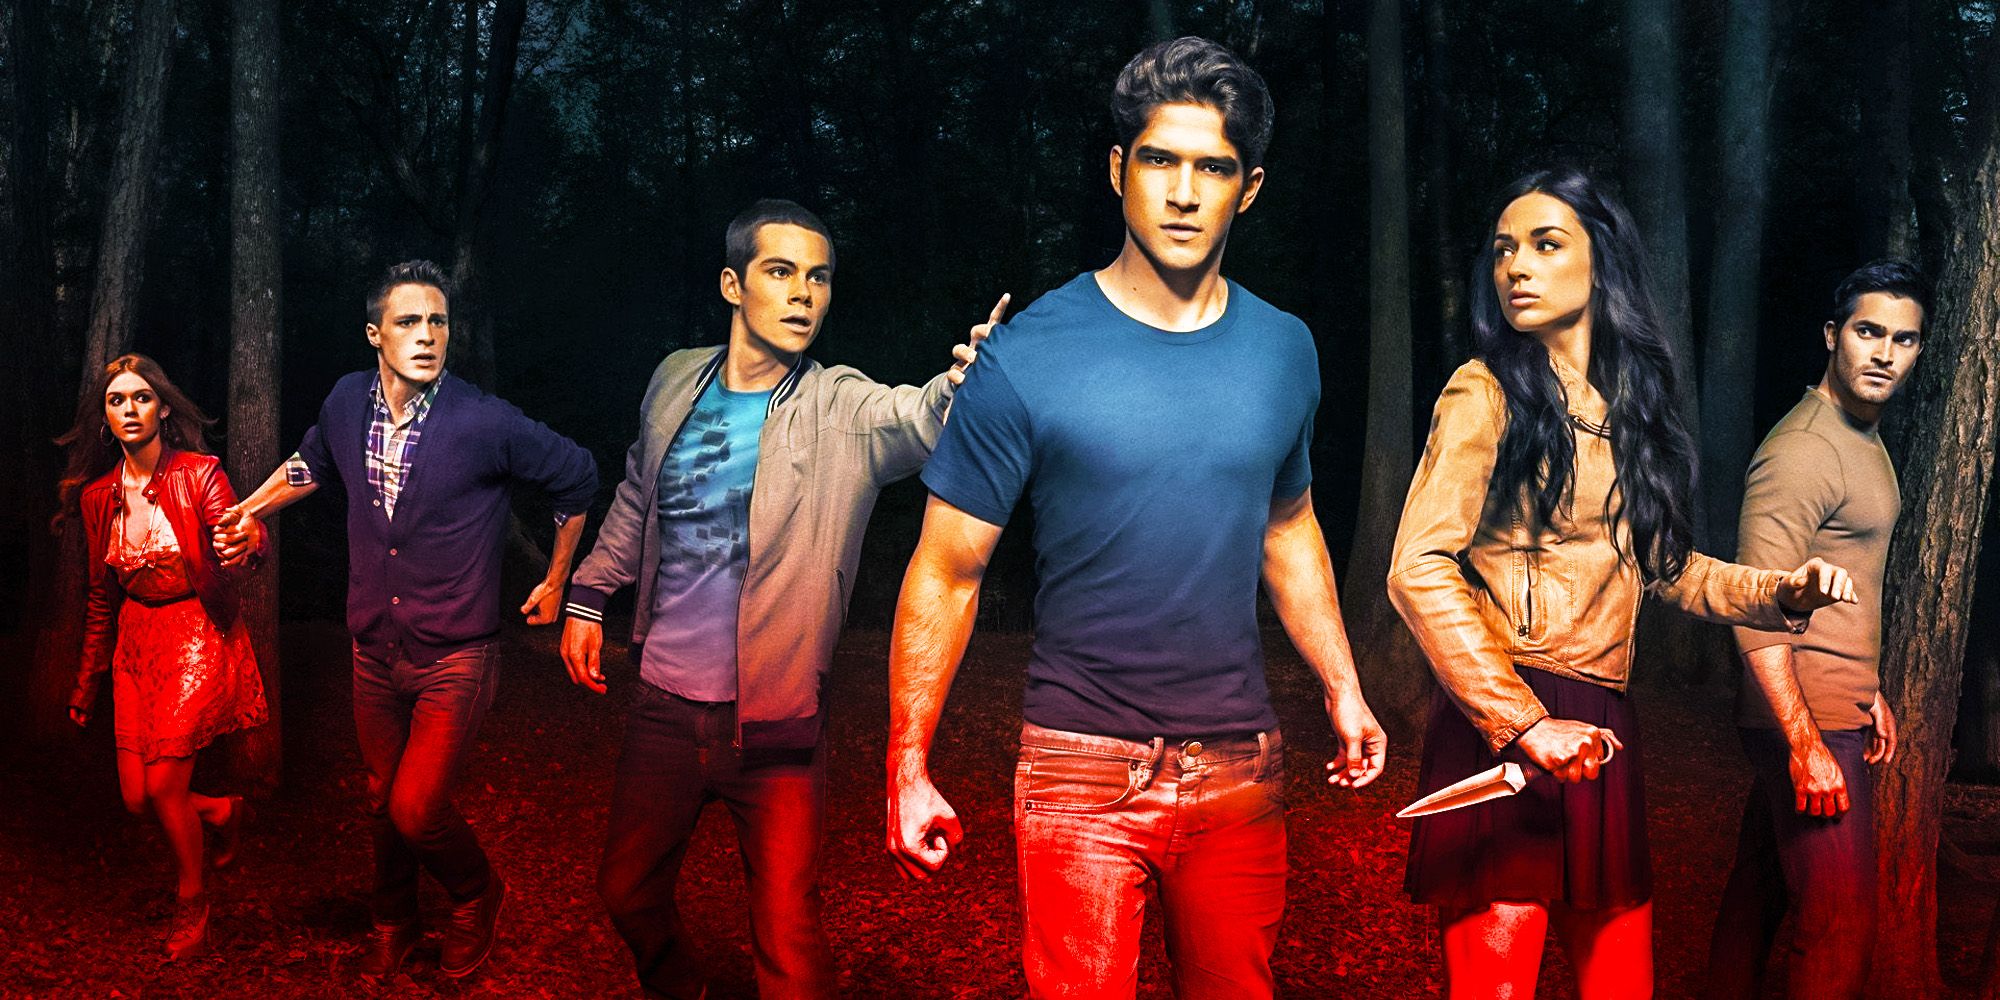 Teen wolf movie characters standing in woods